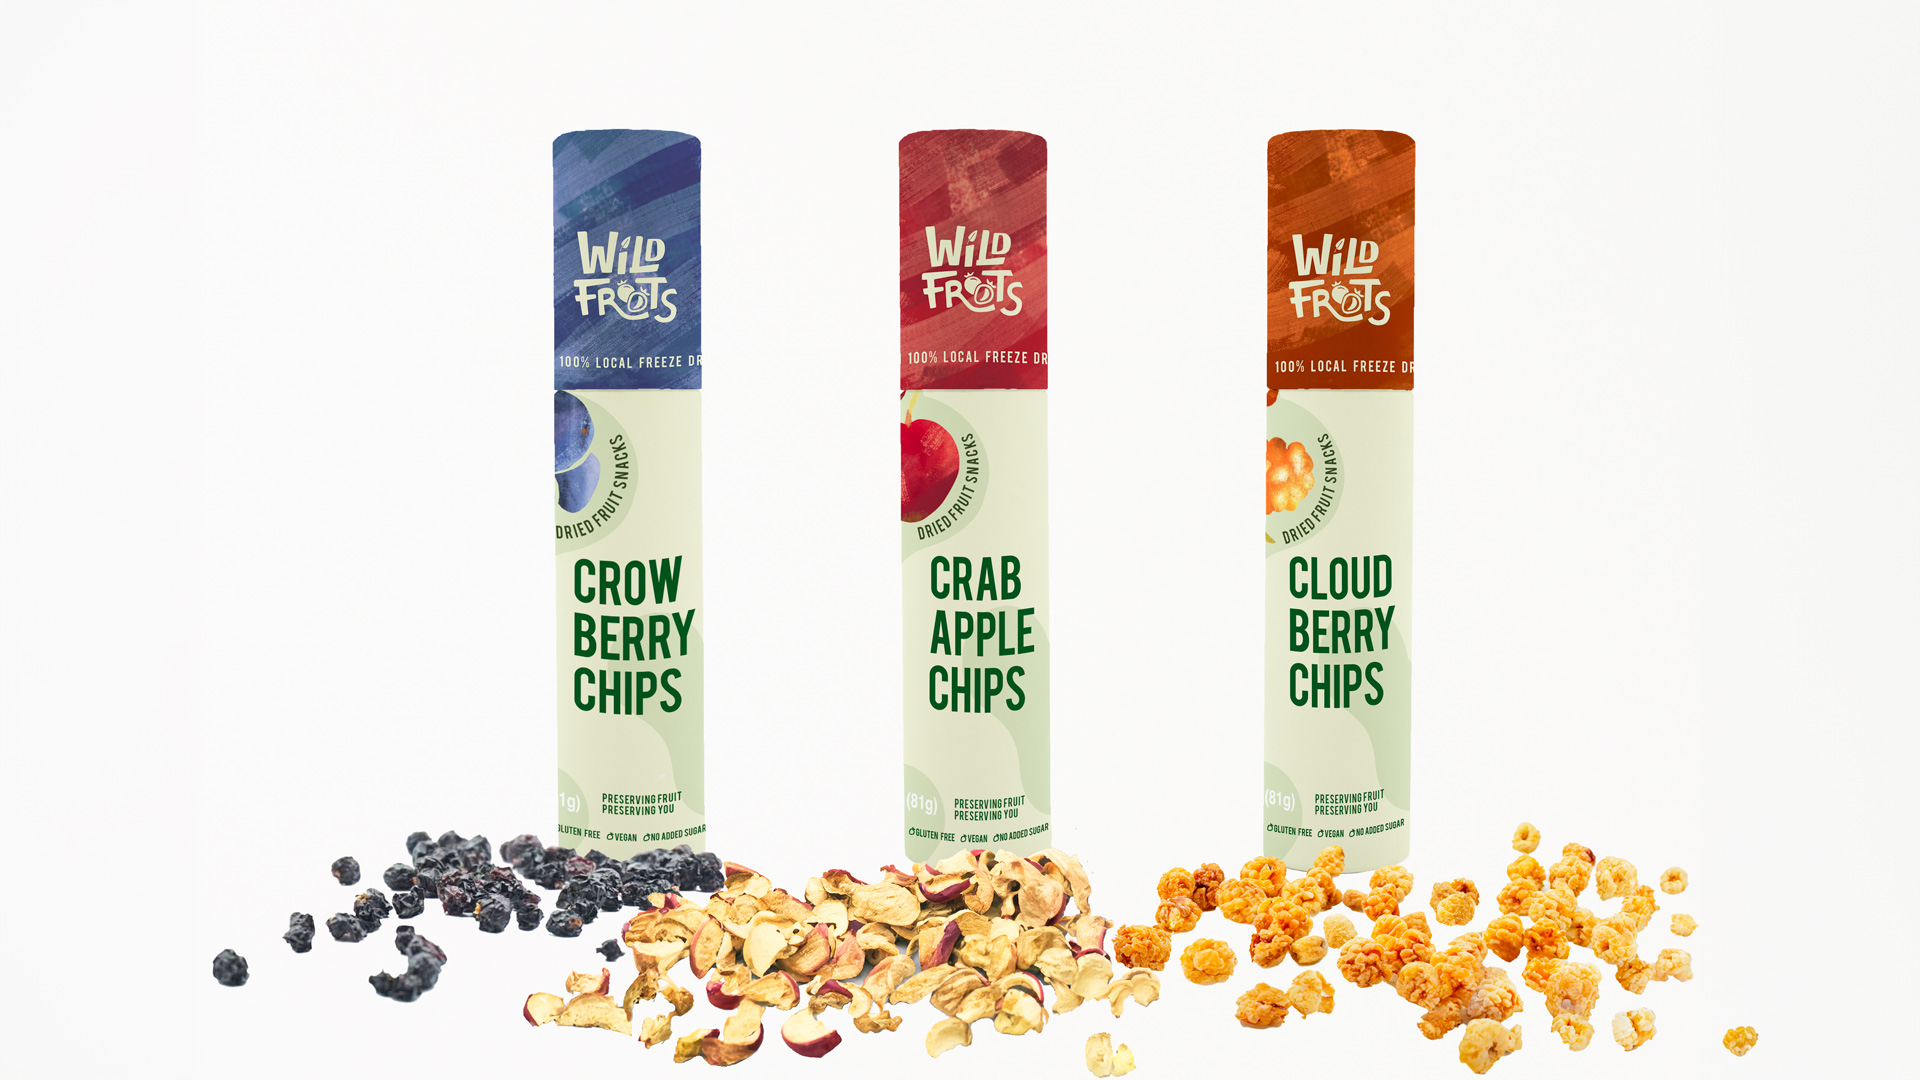 Image of 3 packages of Wildfroots products crowberry, crab apple, and cloudberry displayed in a line from left to right against a white background.